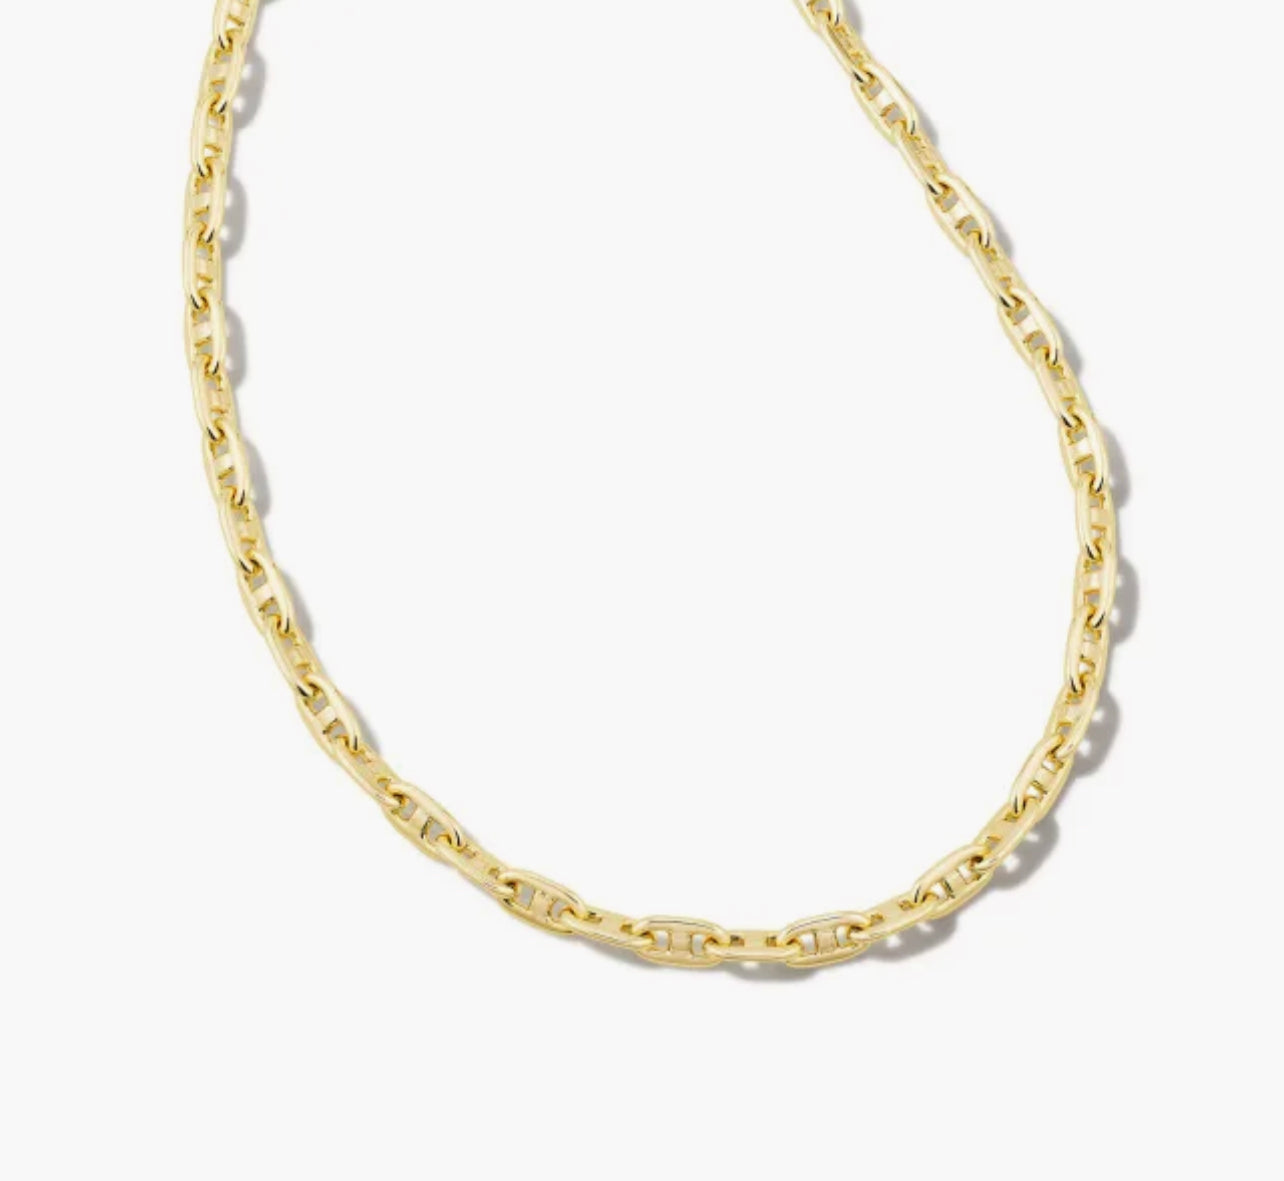 Kendra Scott-Bailey Chain Necklace in Gold 9608802179